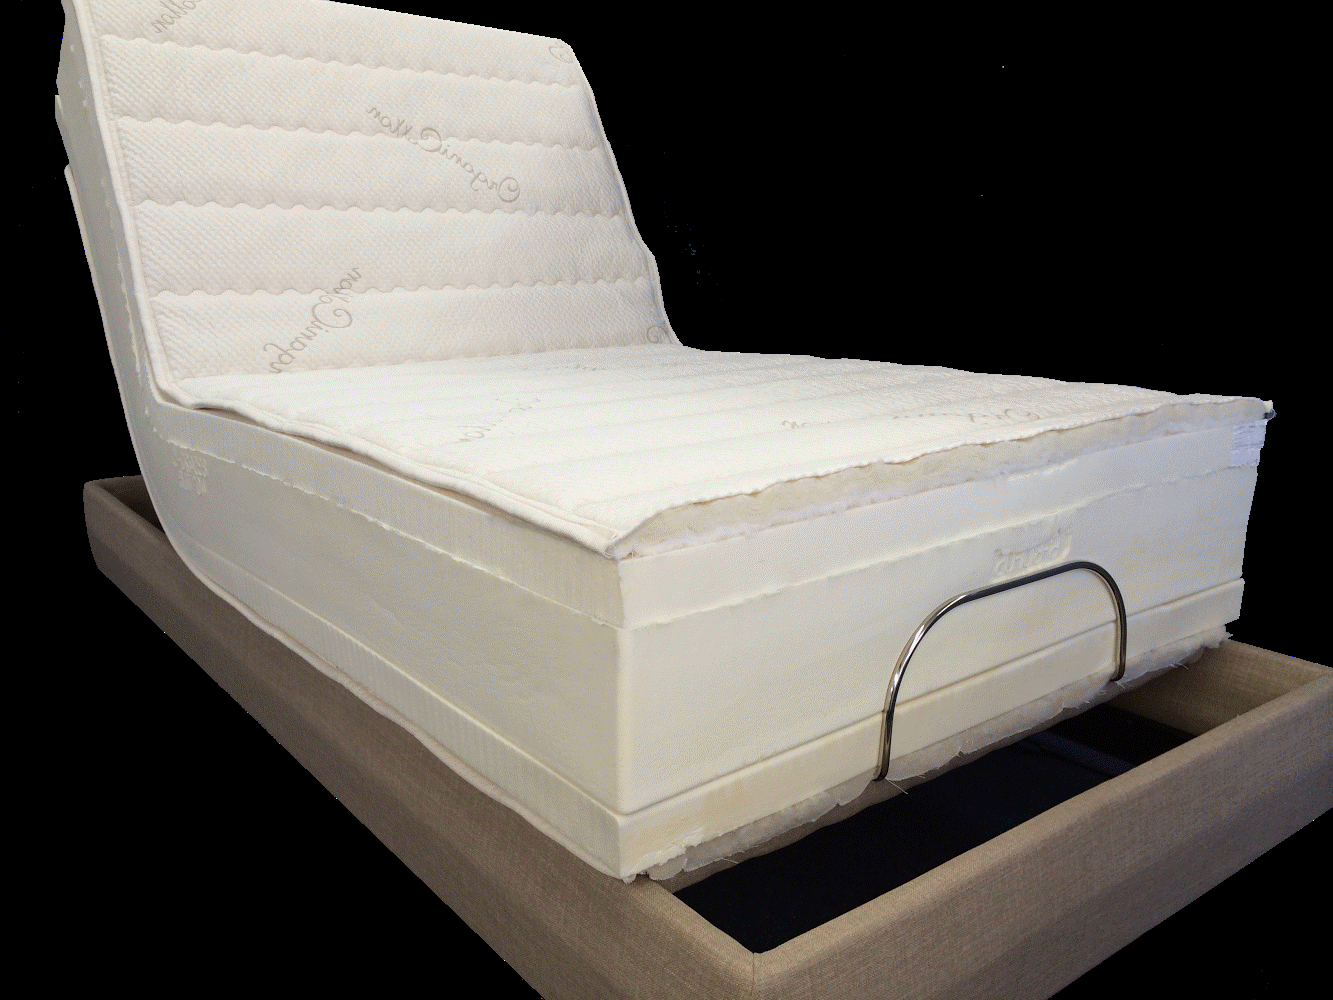 THE ULTIMATE in LA El Monte no toxin latex-pedic natural organic pure certified chemical free cotton and wool adjustable bed mattresses